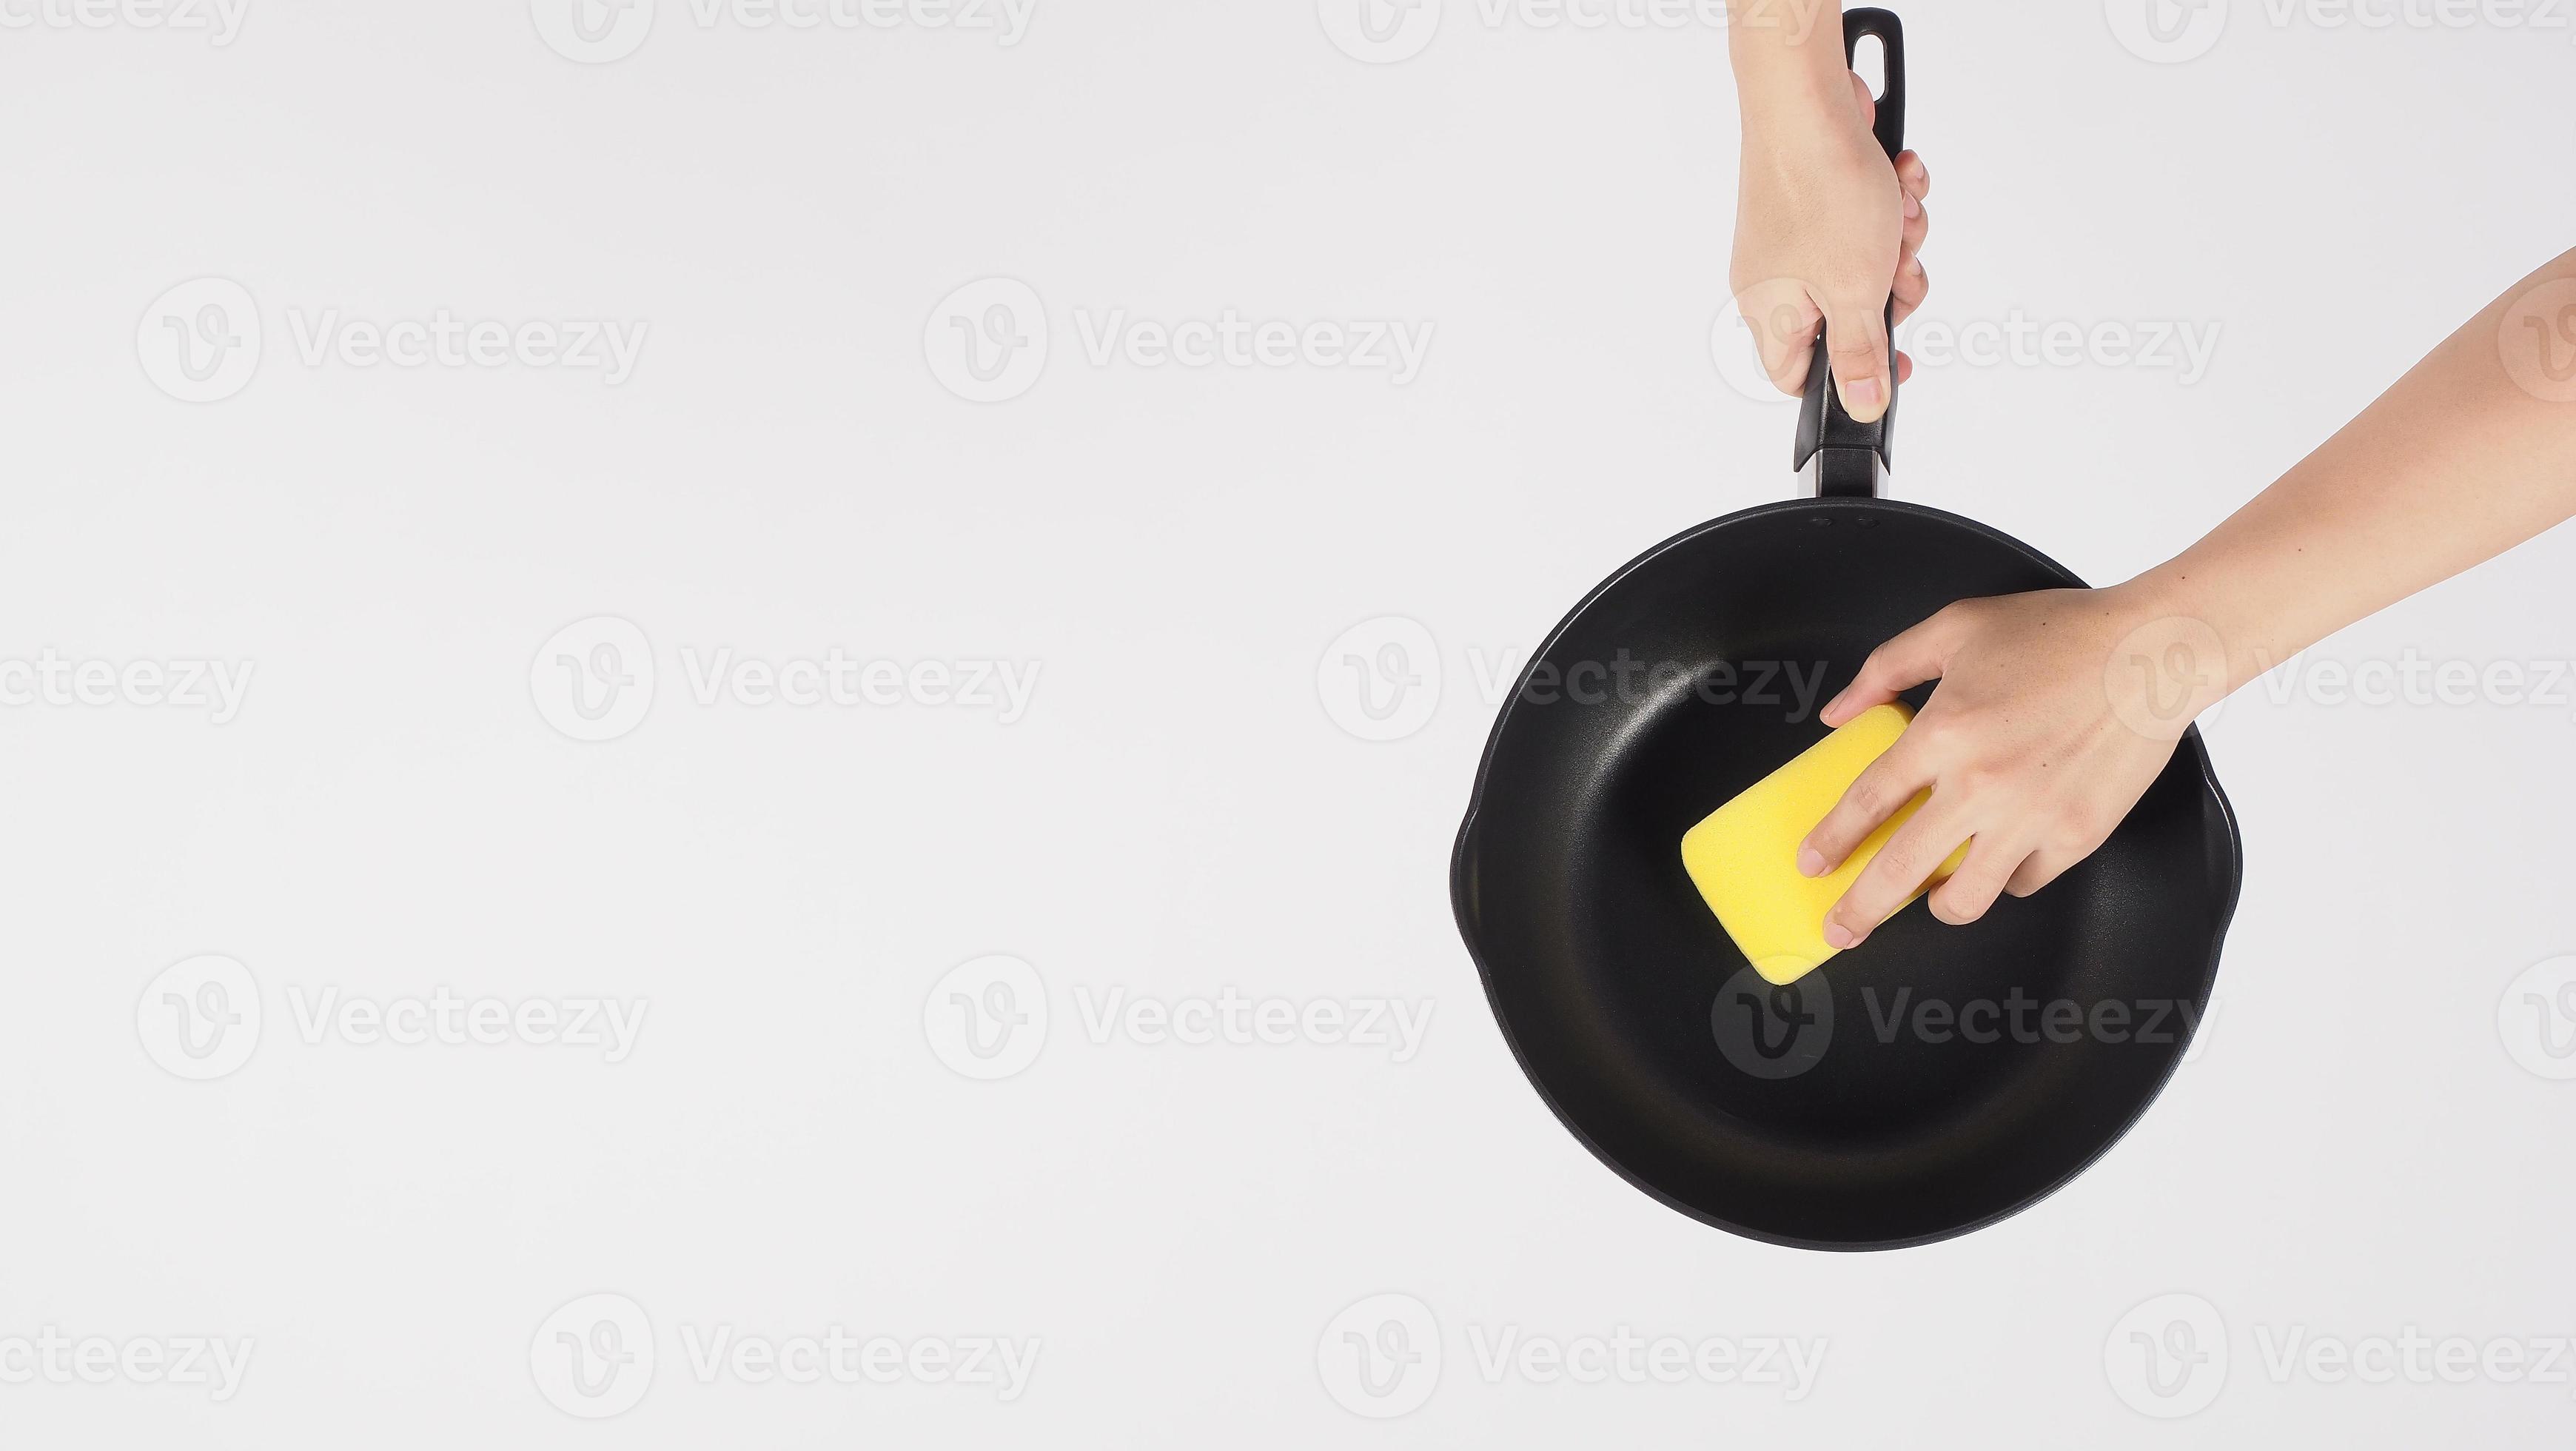 https://static.vecteezy.com/system/resources/previews/005/587/854/large_2x/hand-cleaning-the-non-stick-pan-with-handy-dish-washing-sponge-photo.JPG